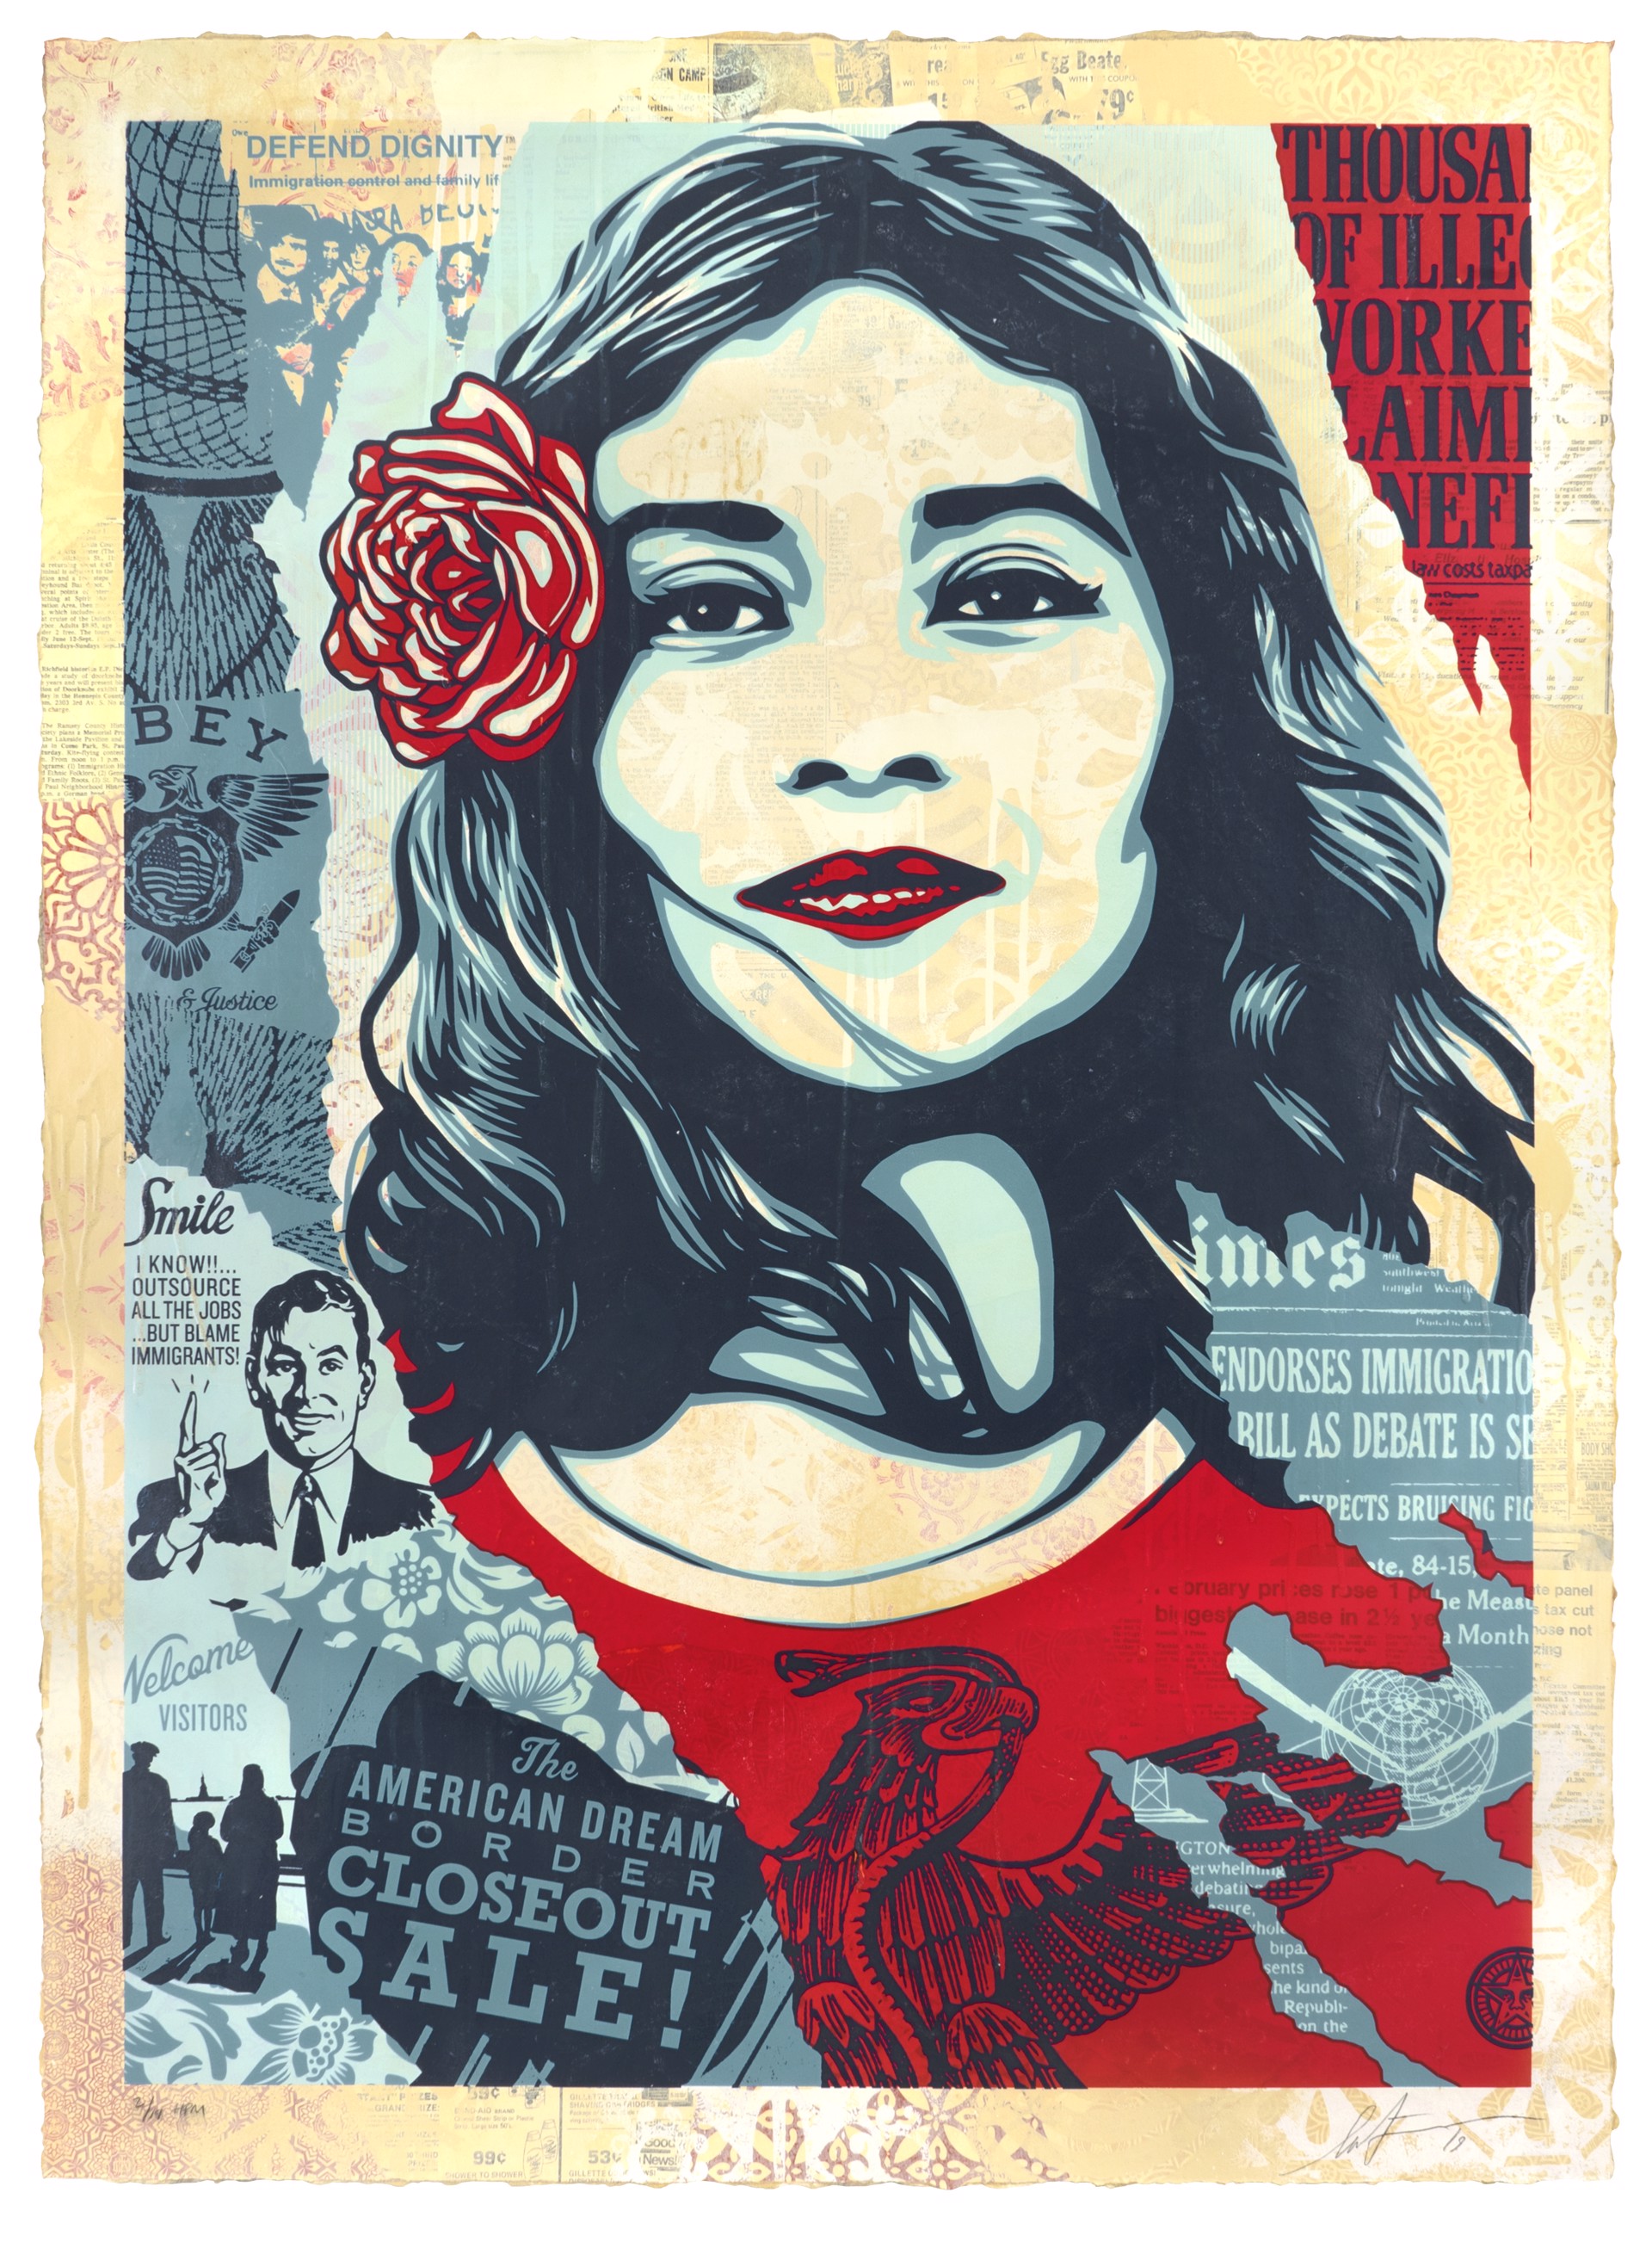 Defend Dignity HPM by Shepard Fairey